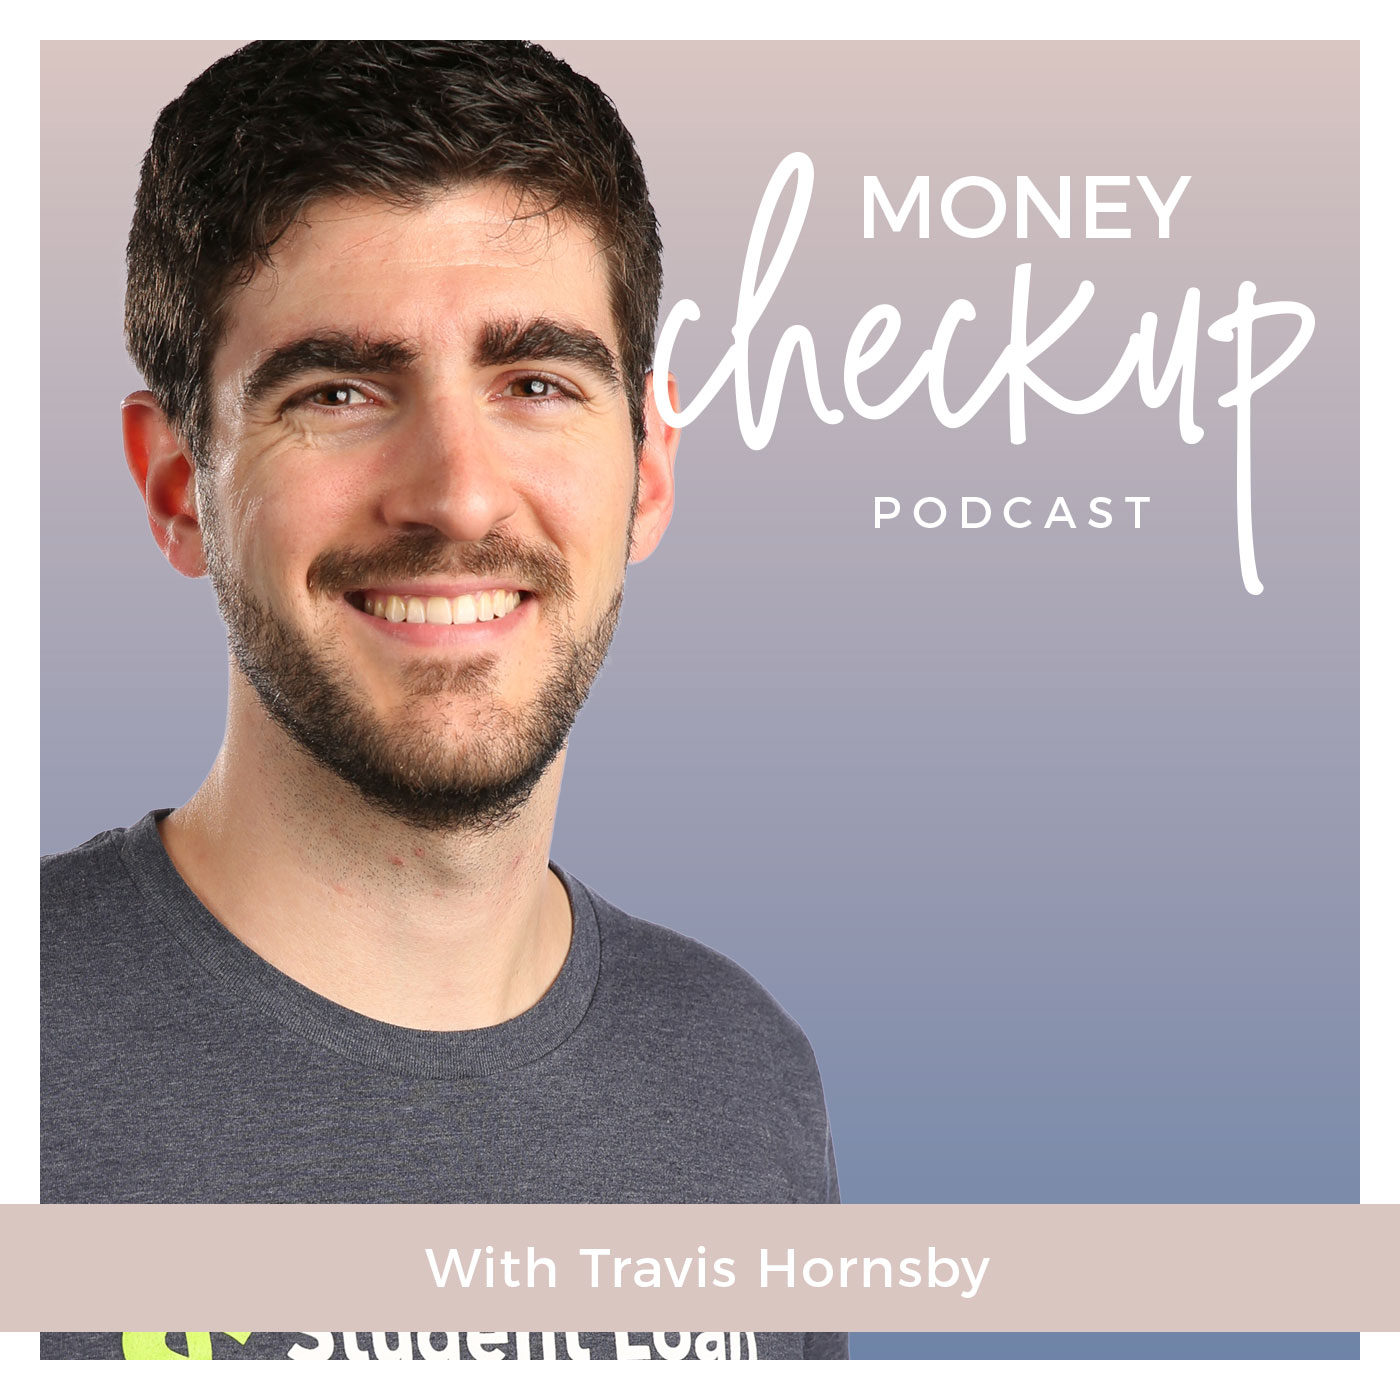 Money Checkup Podcast With Travis-Hornsby